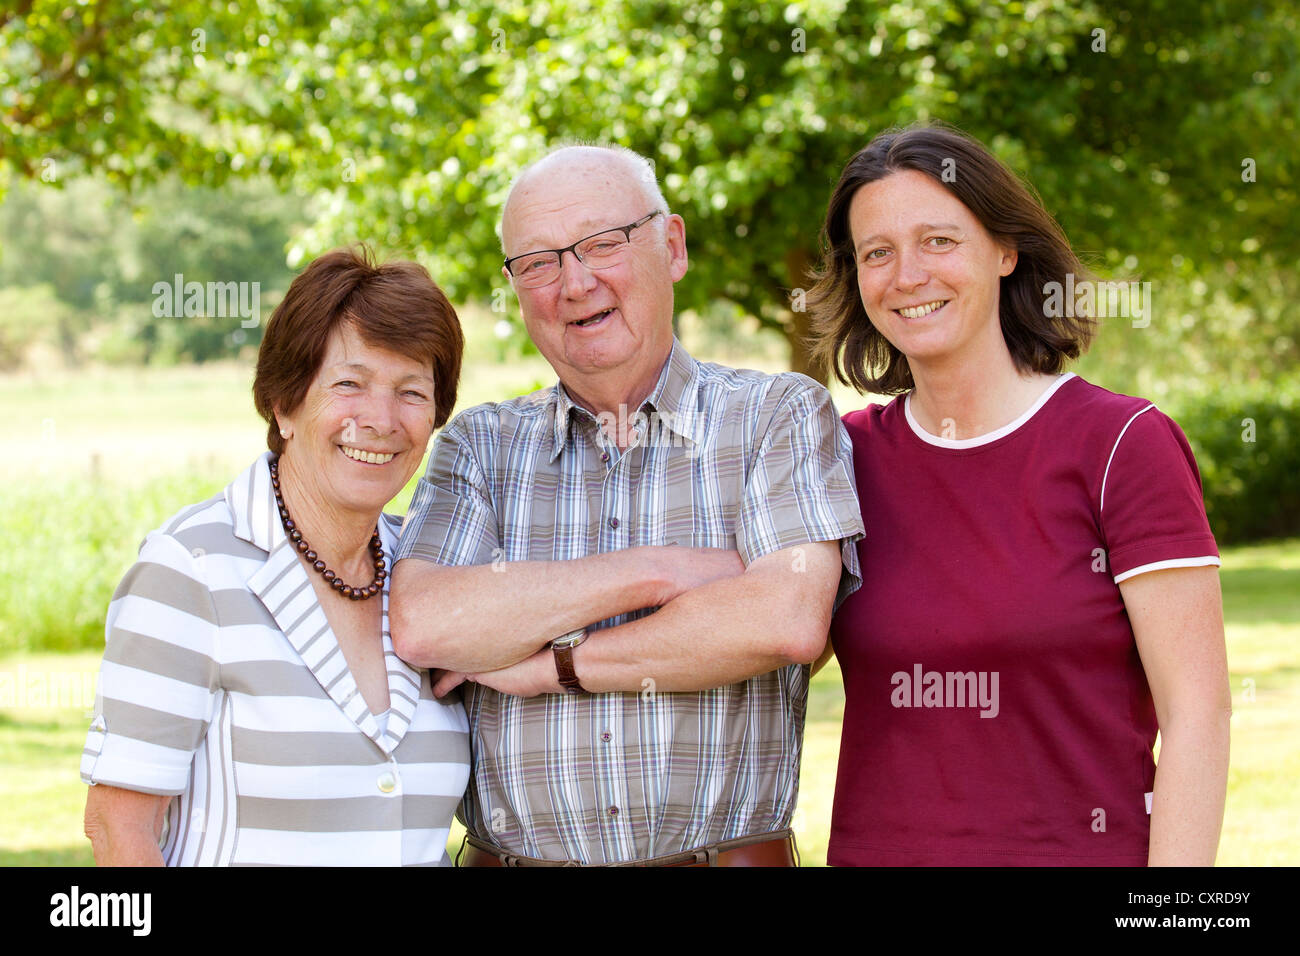 Elderly couple, retirees, 70-80 years old, with their daughter, 40-50 years old, Bengel, Rhineland-Palatinate, Germany, Europe Stock Photo